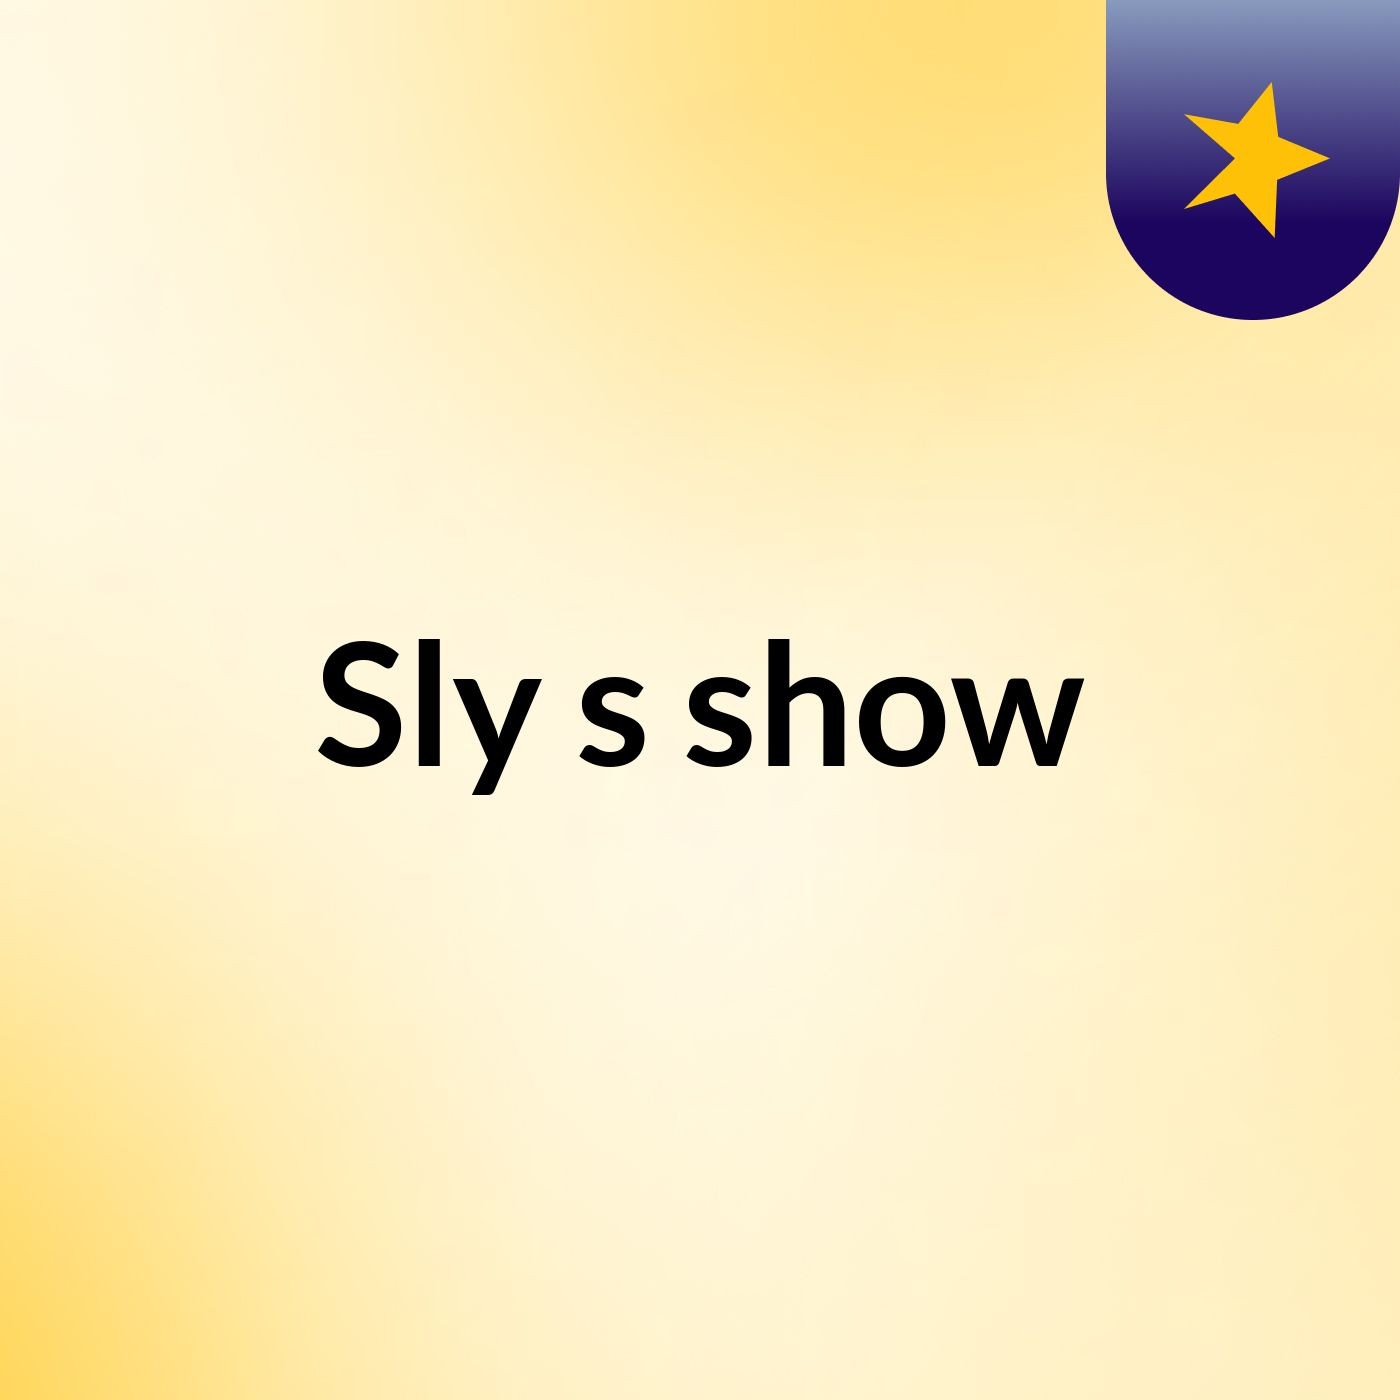 Sly's show